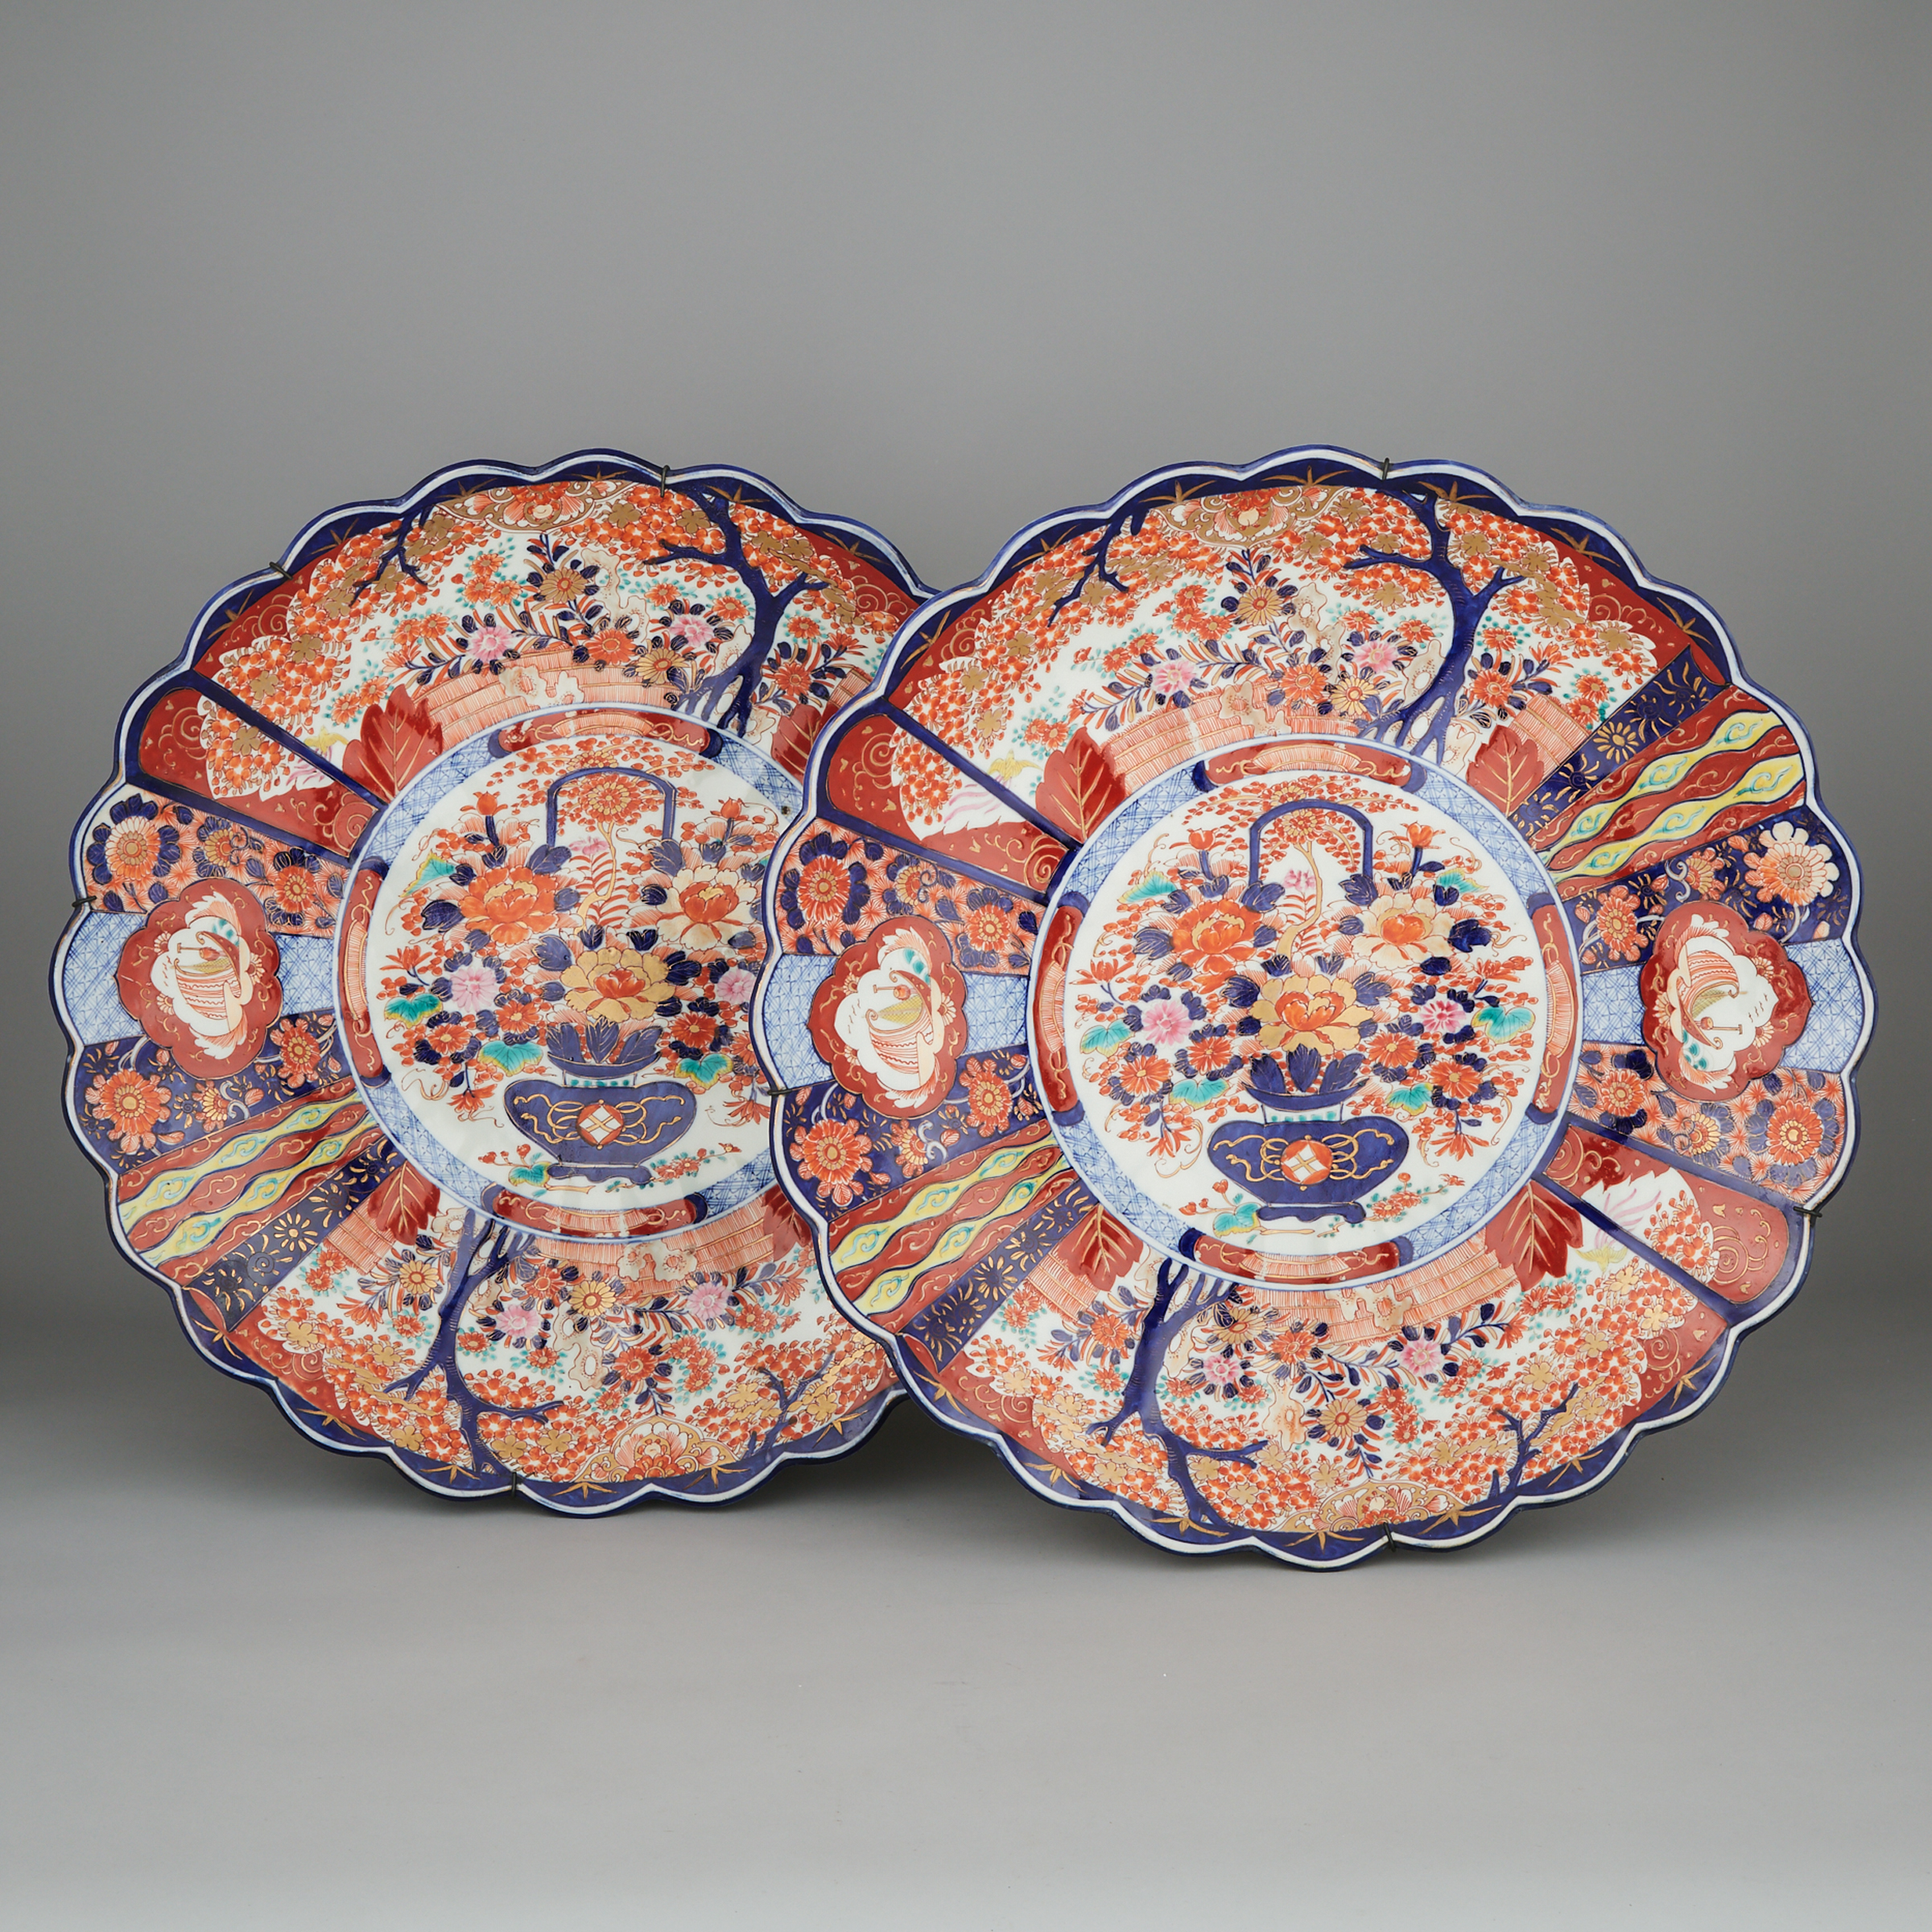 A Pair of Large Floral Rimmed Imari Chargers, 19th Century